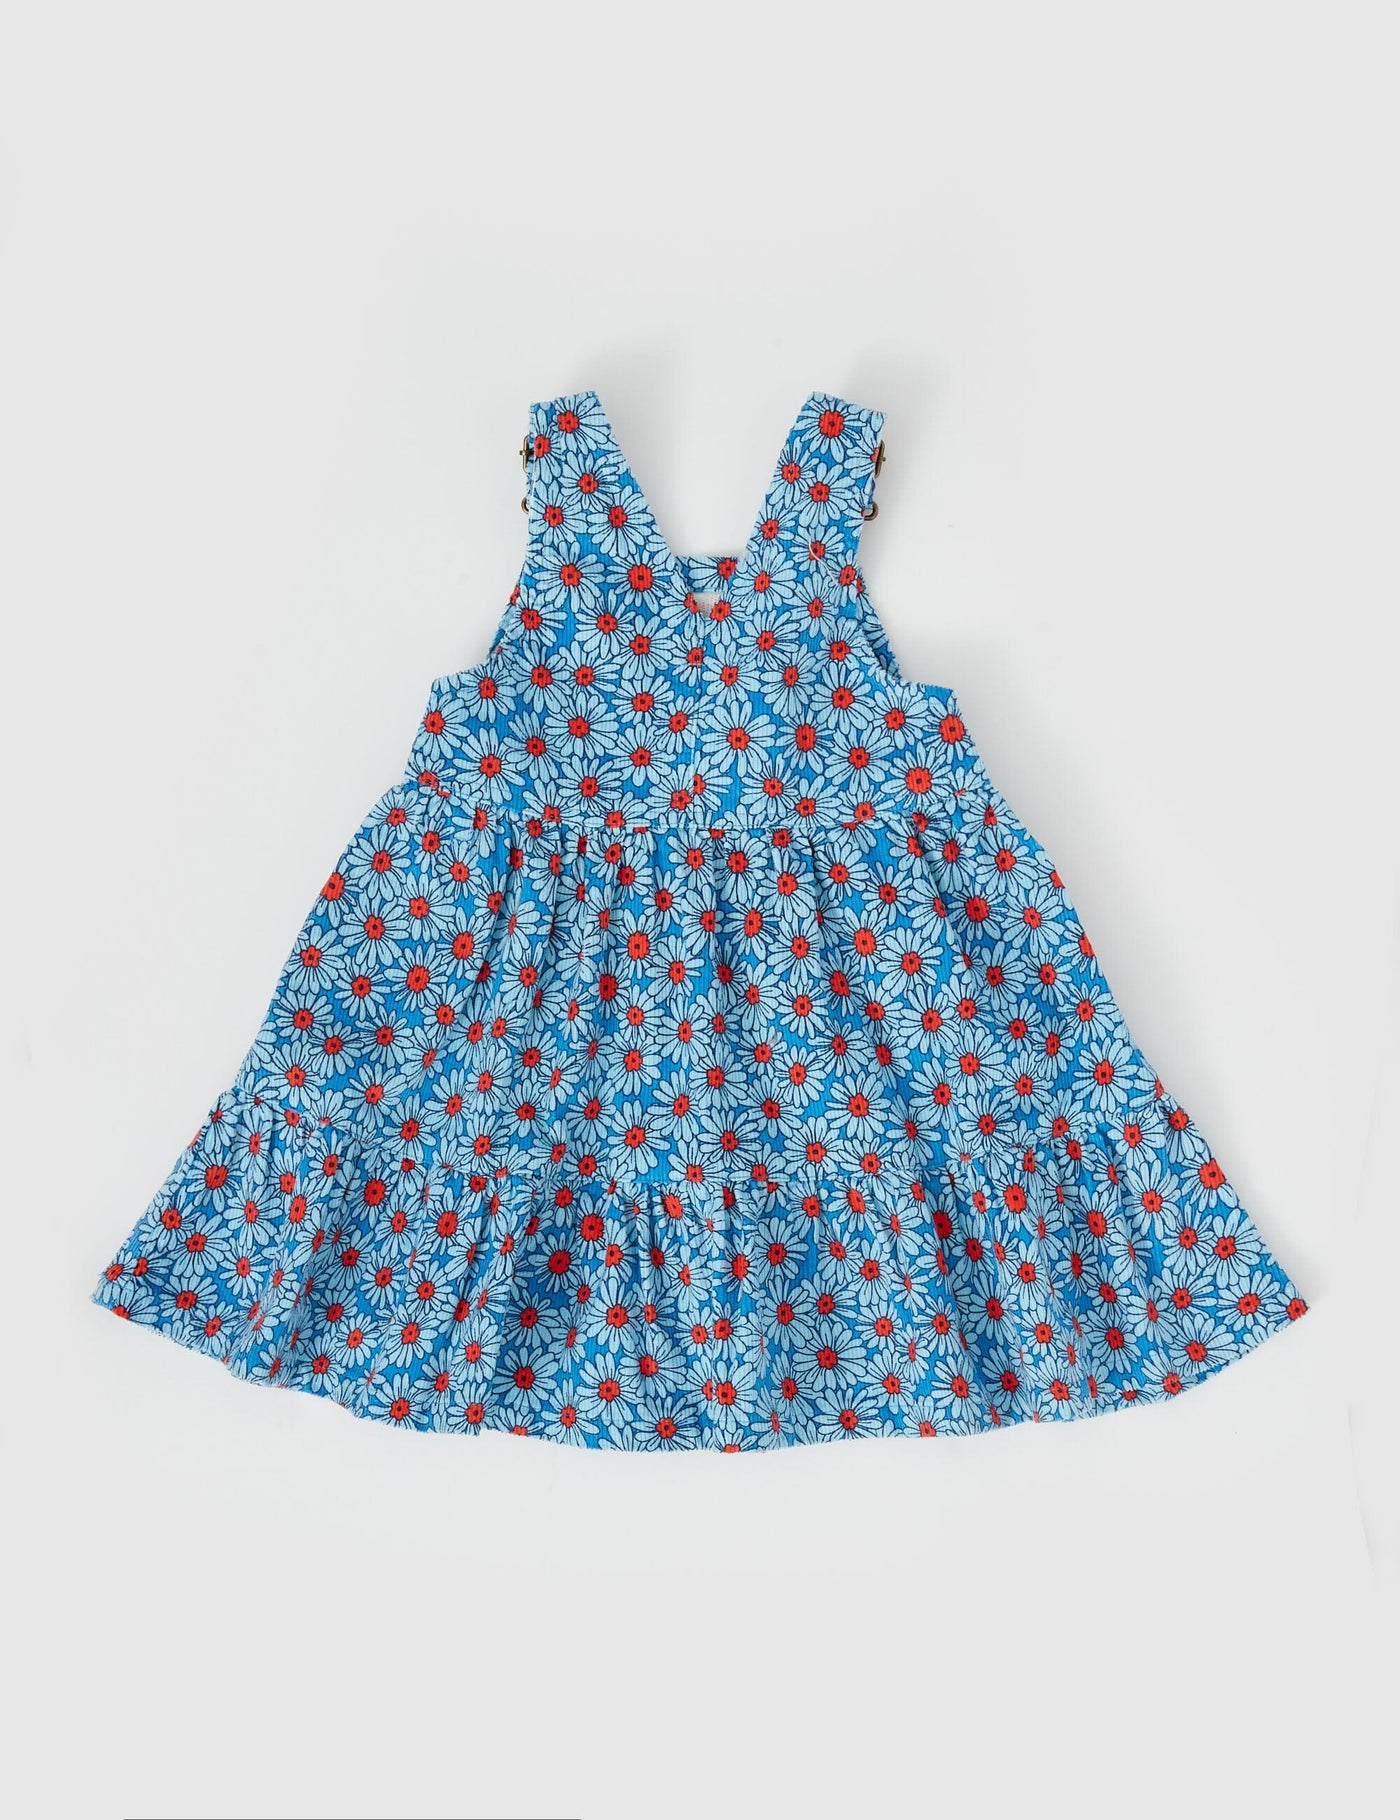 Goldie & Ace Dixie Daisy Tiered Corduroy Pinafore Dress - Blue Red Sleeveless Dress Goldie & Ace 